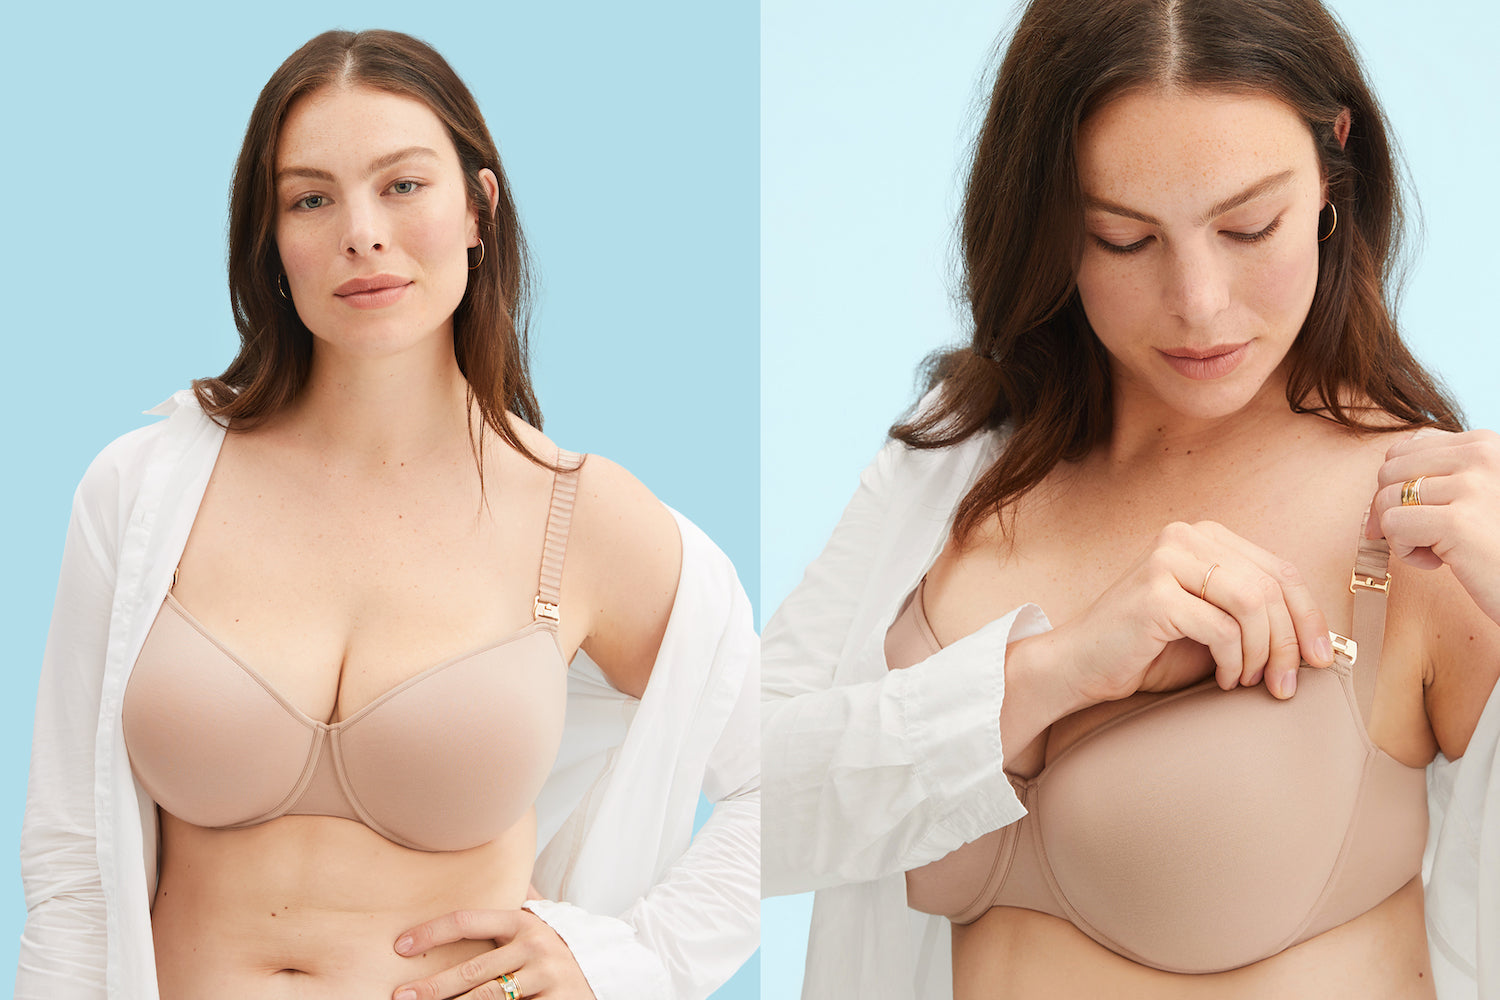 Most moms don't wear the right size nursing bra. Call us for help